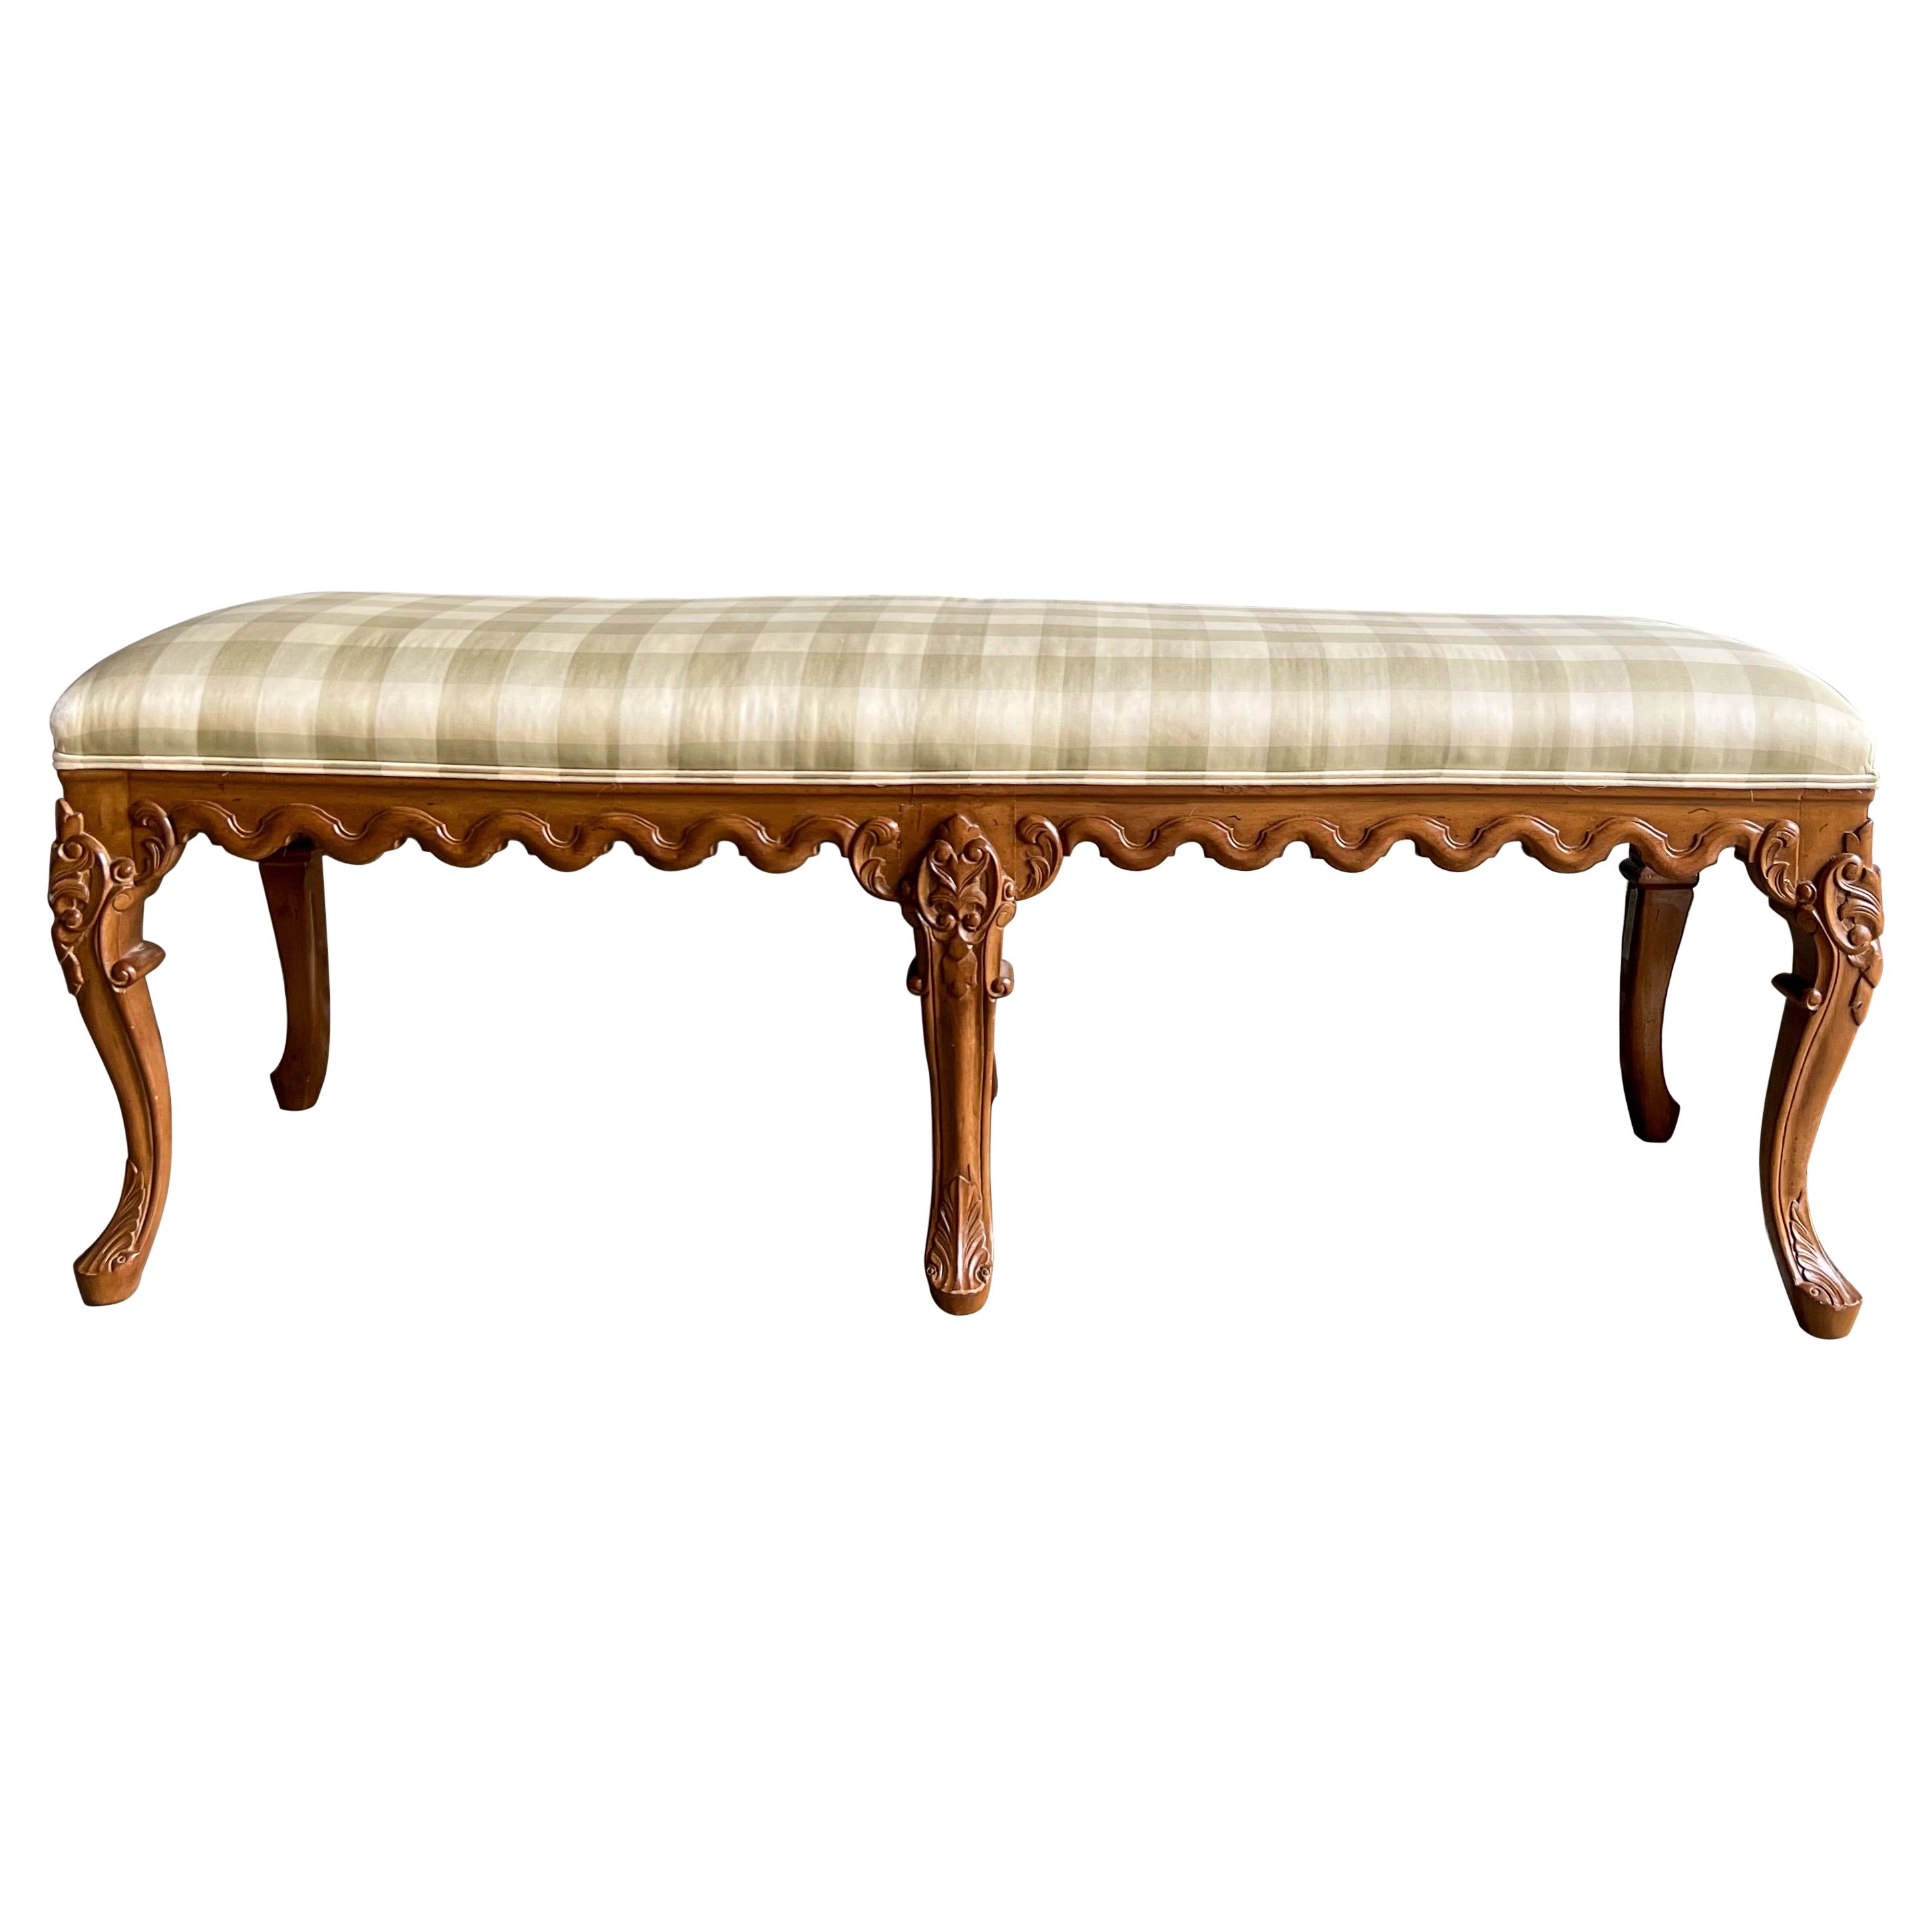 1940s French Carved Fruitwood Bench with Six Legs For Sale